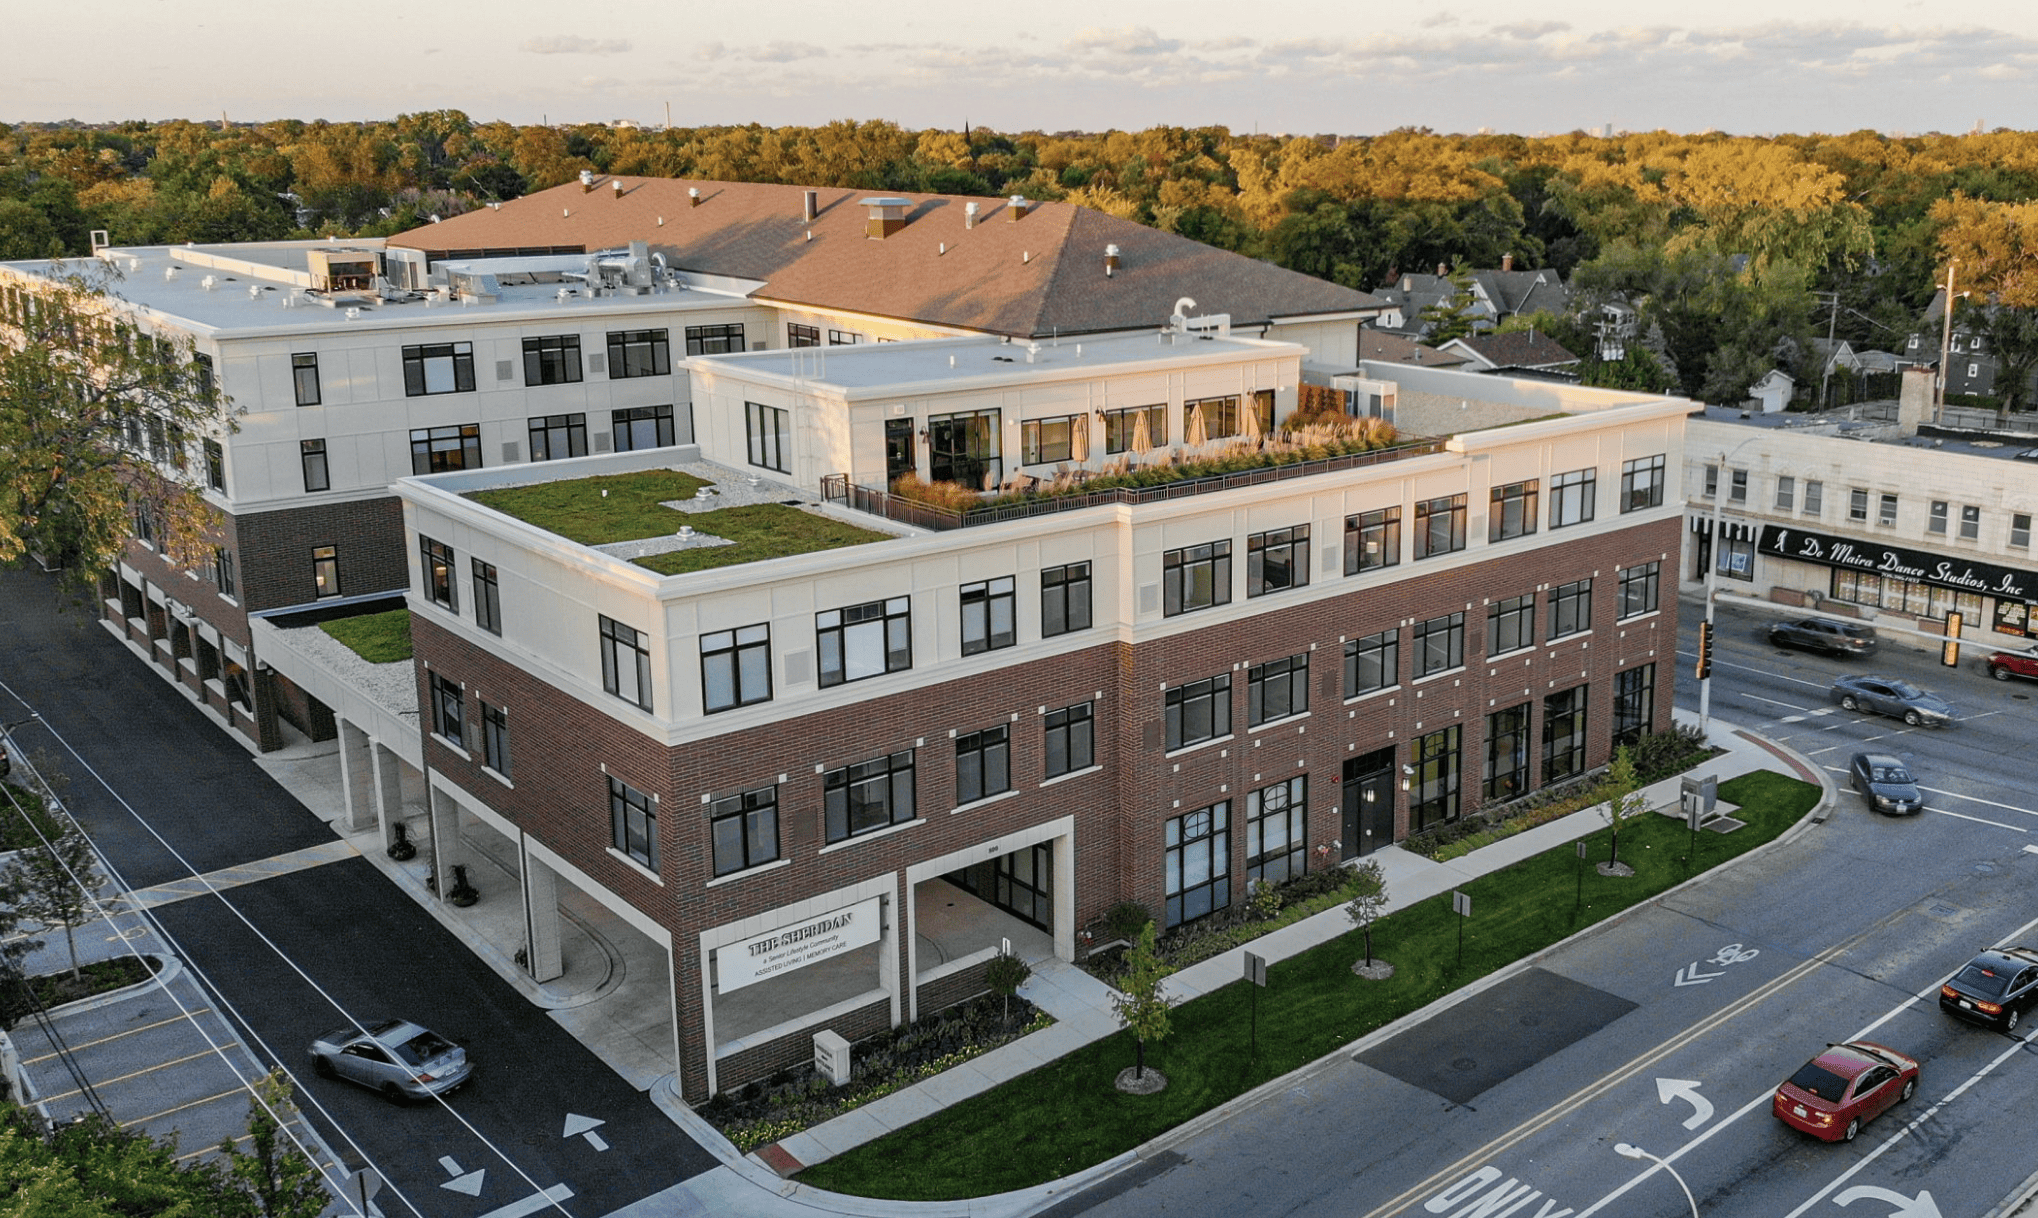 A bird’s eye view of the Sheridan at River Forest.